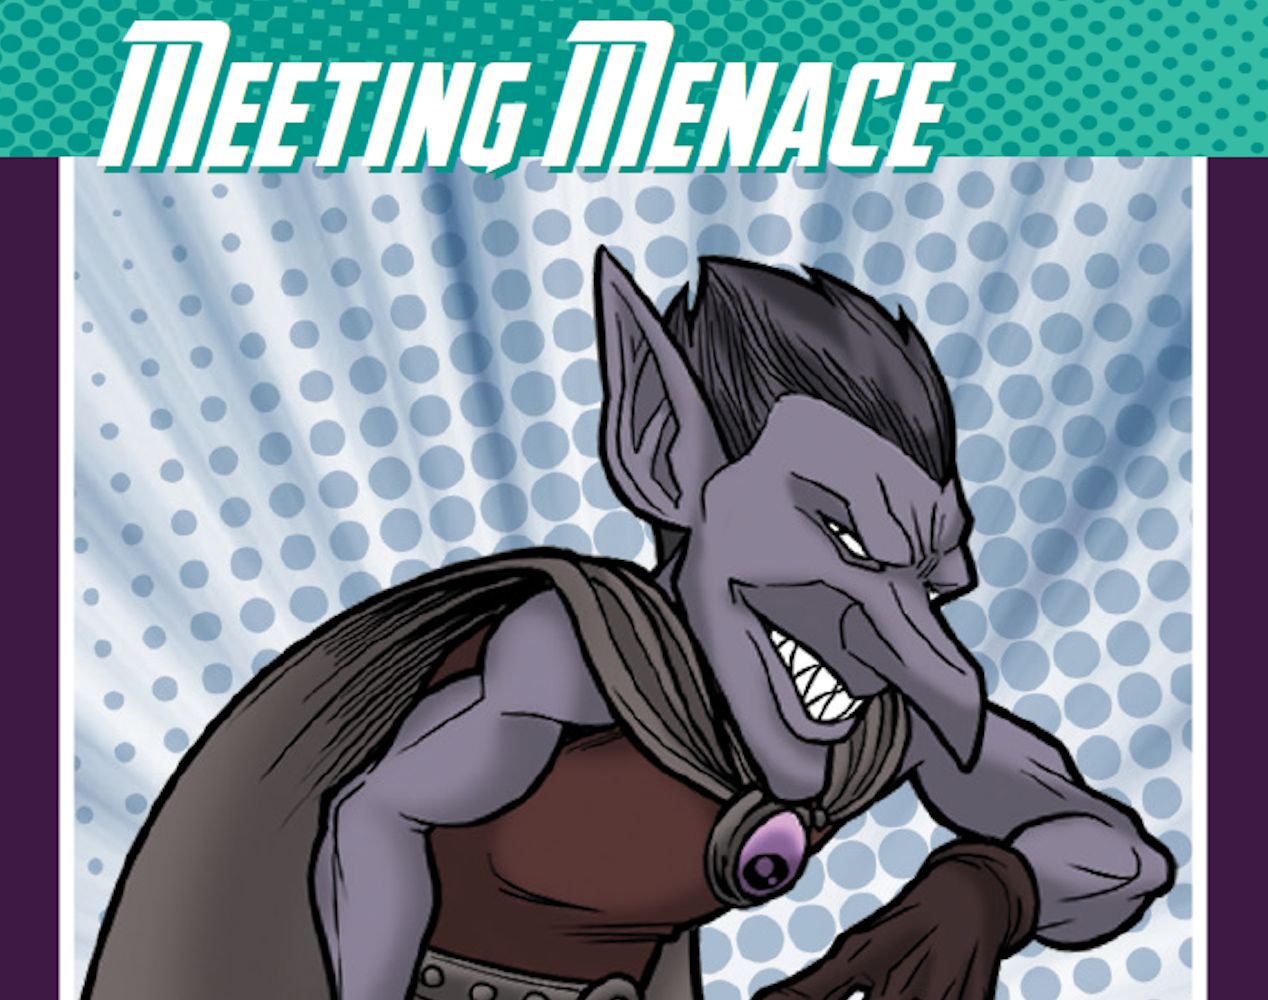 Watch Out For the Meeting Menace!